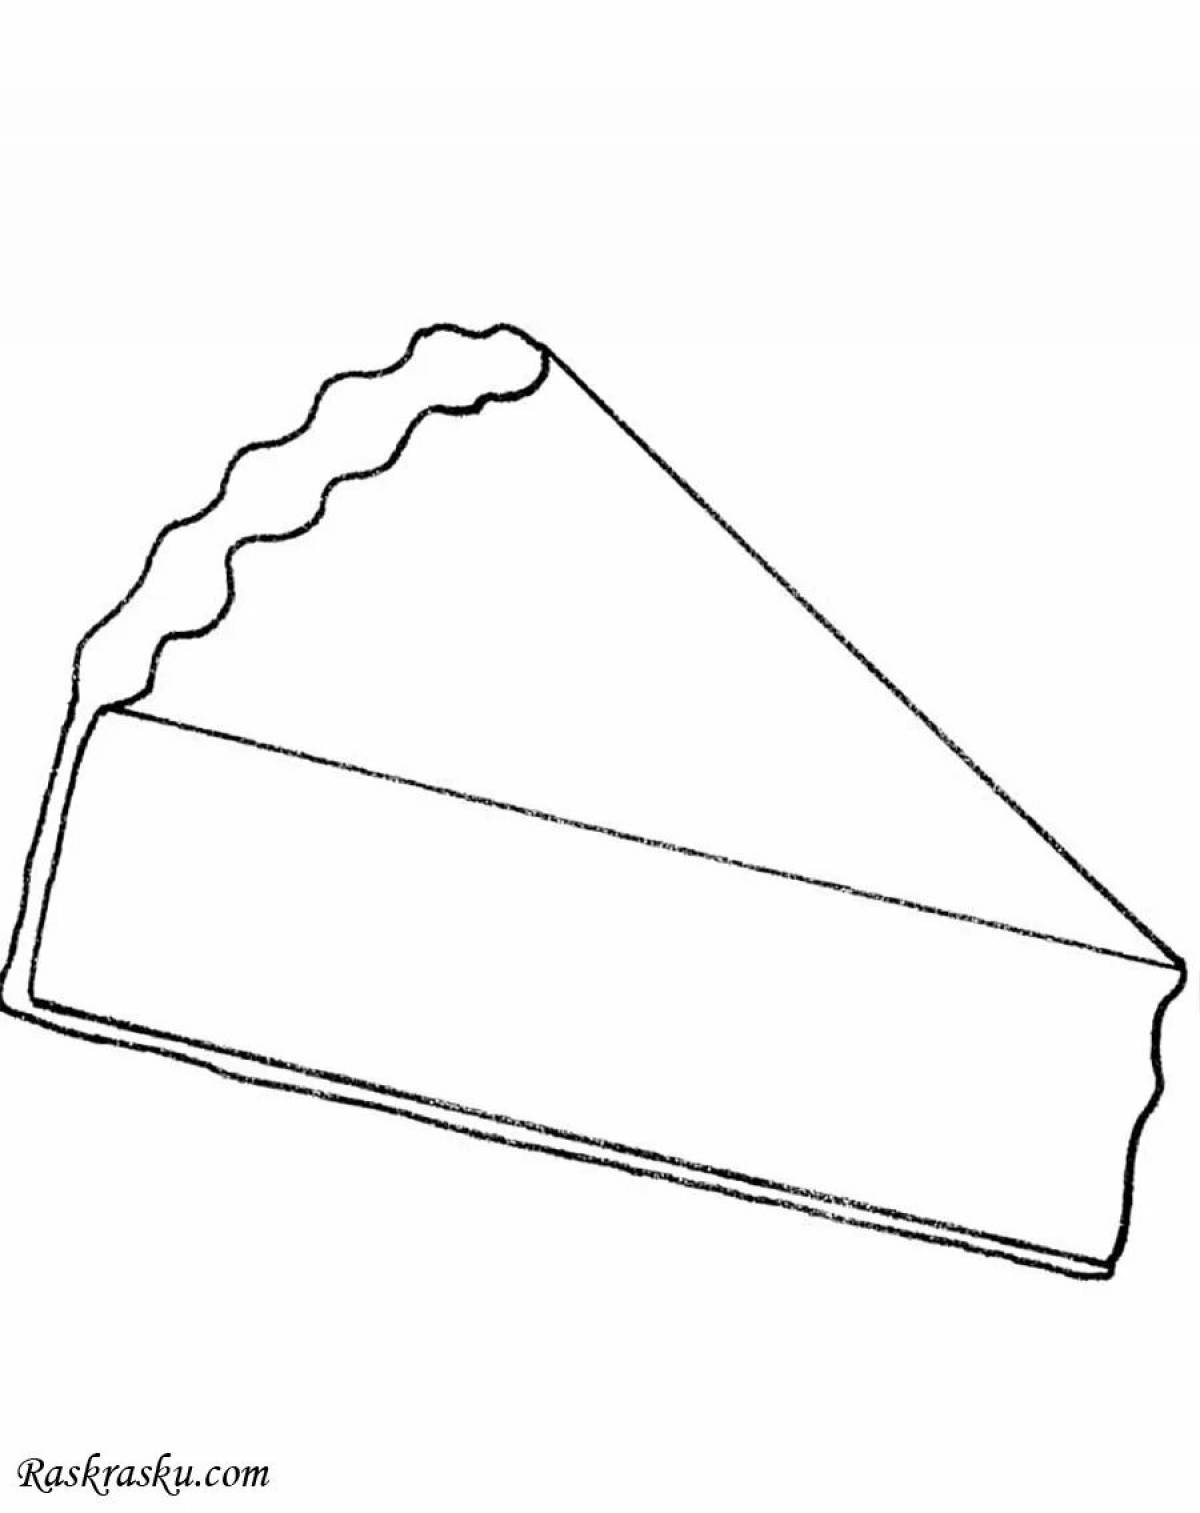 Coloring page glamor casserole